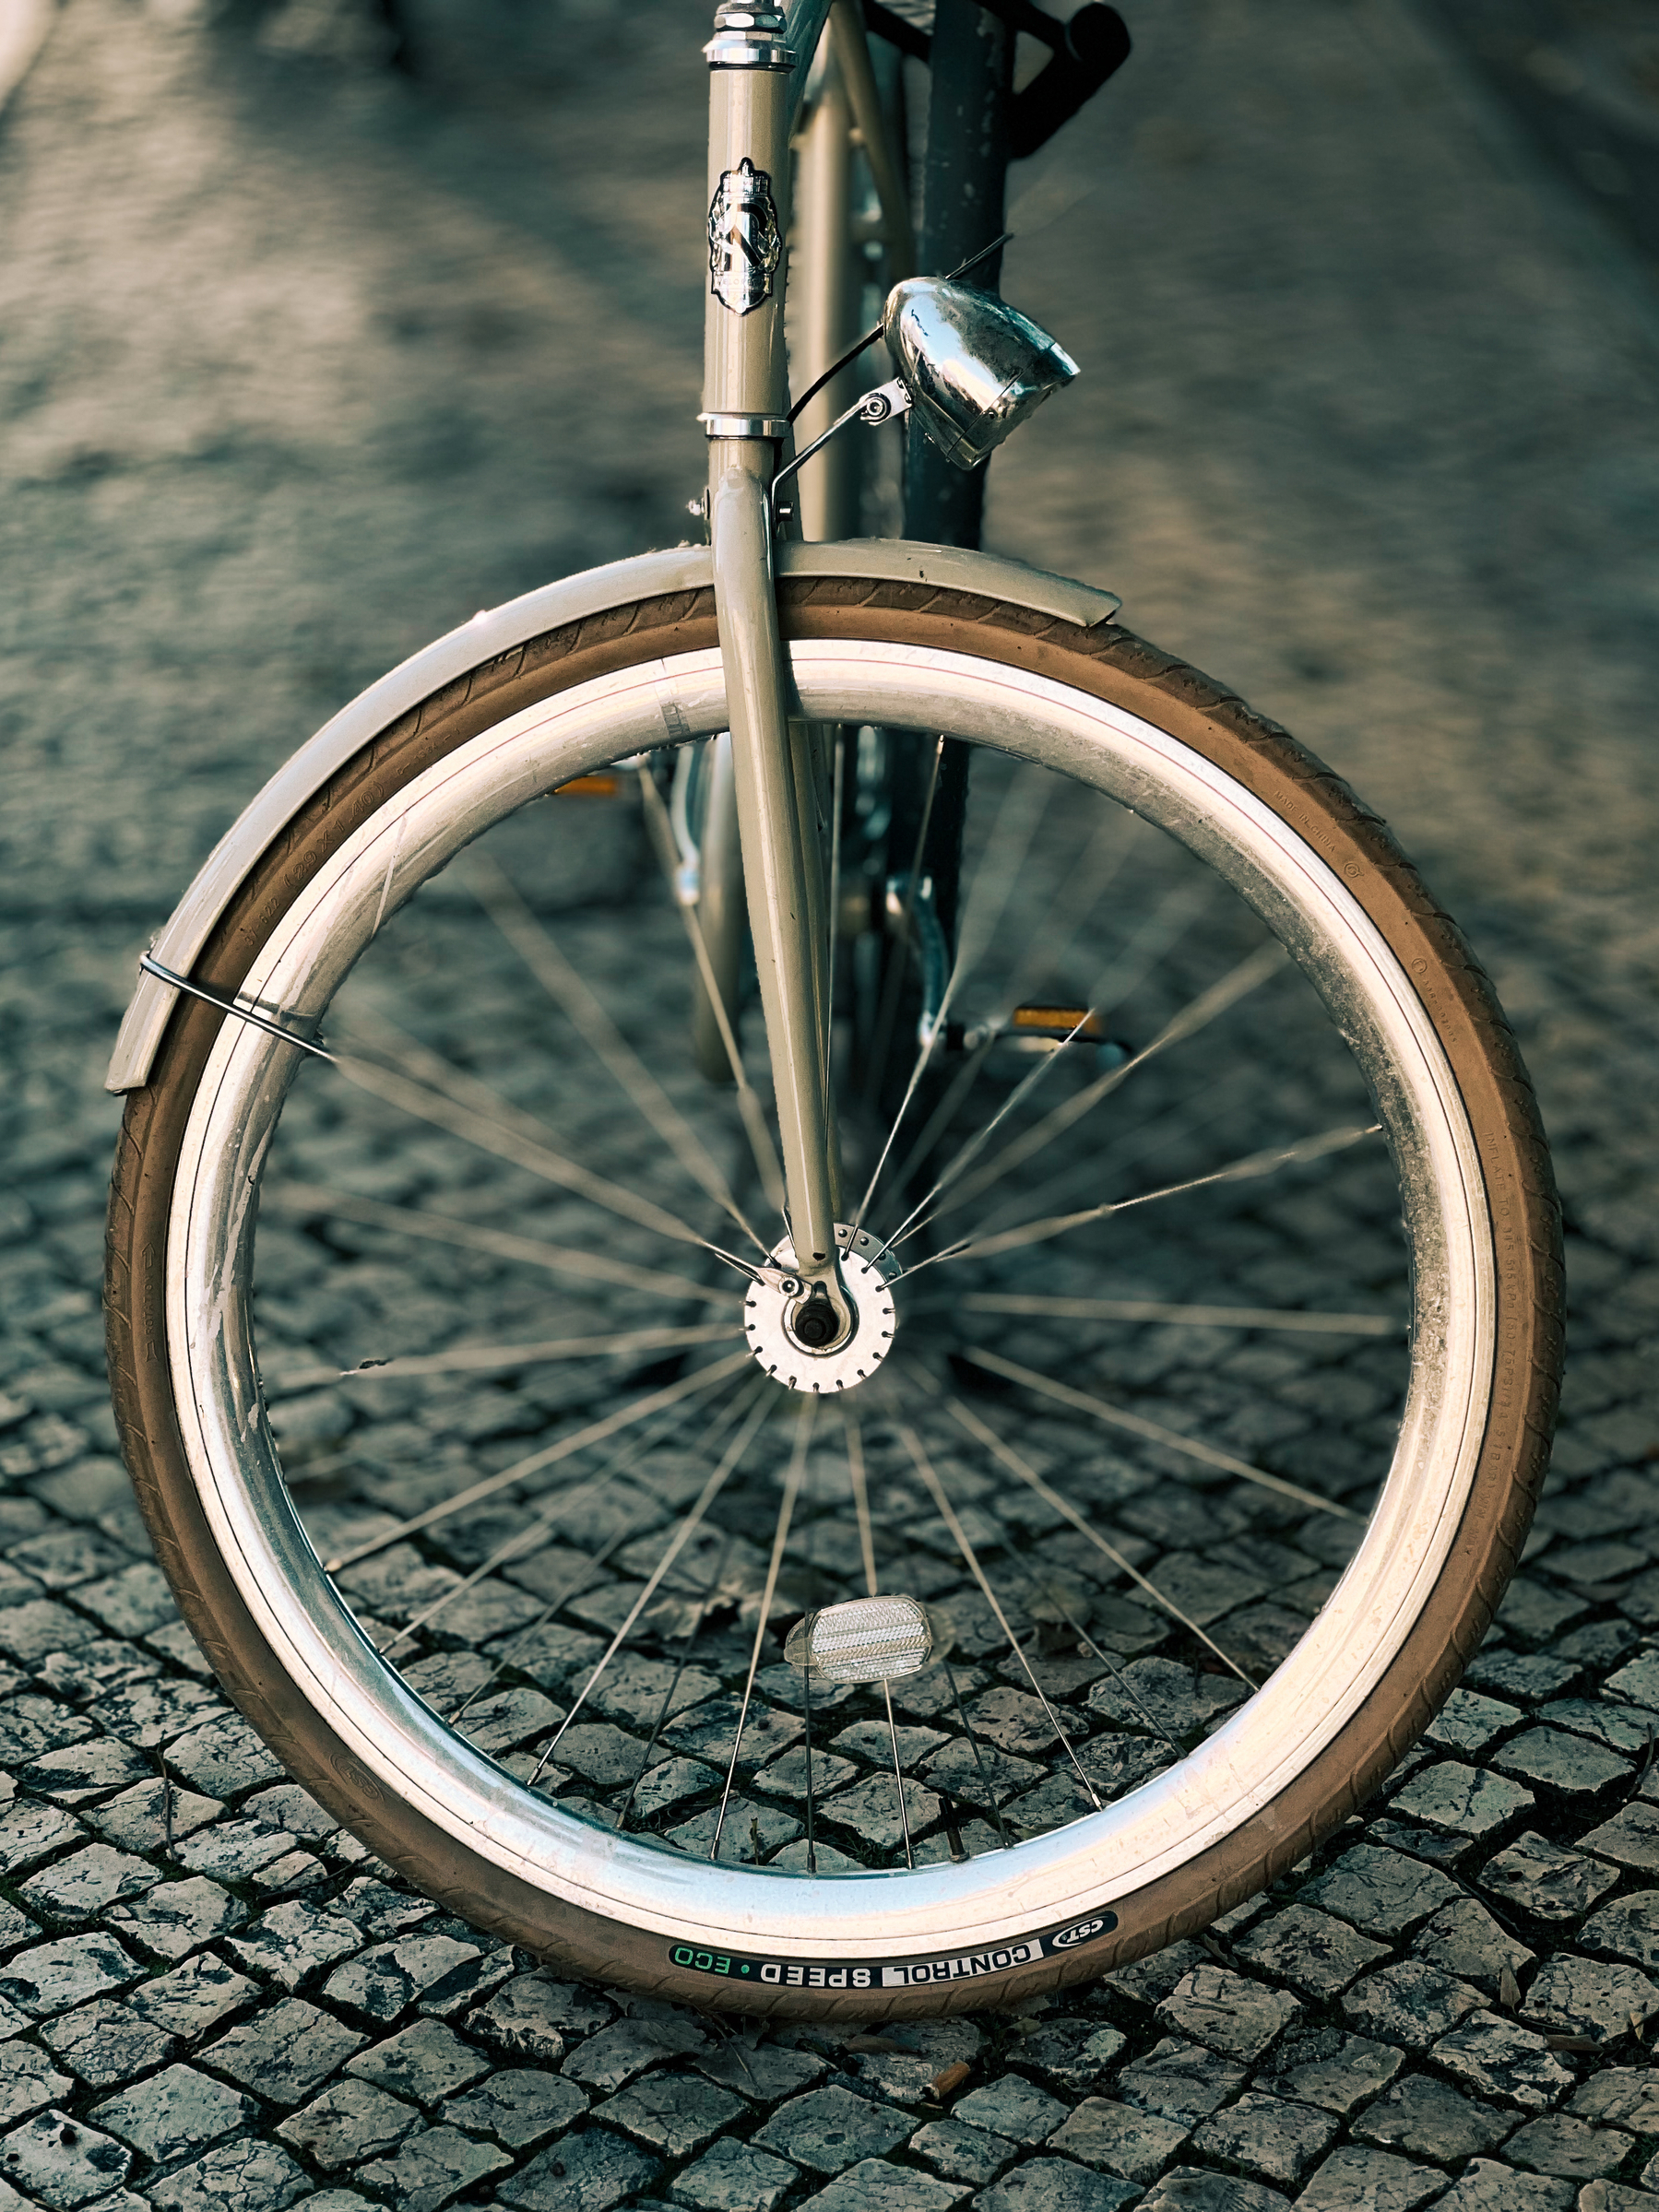 A bicycle front wheel. 